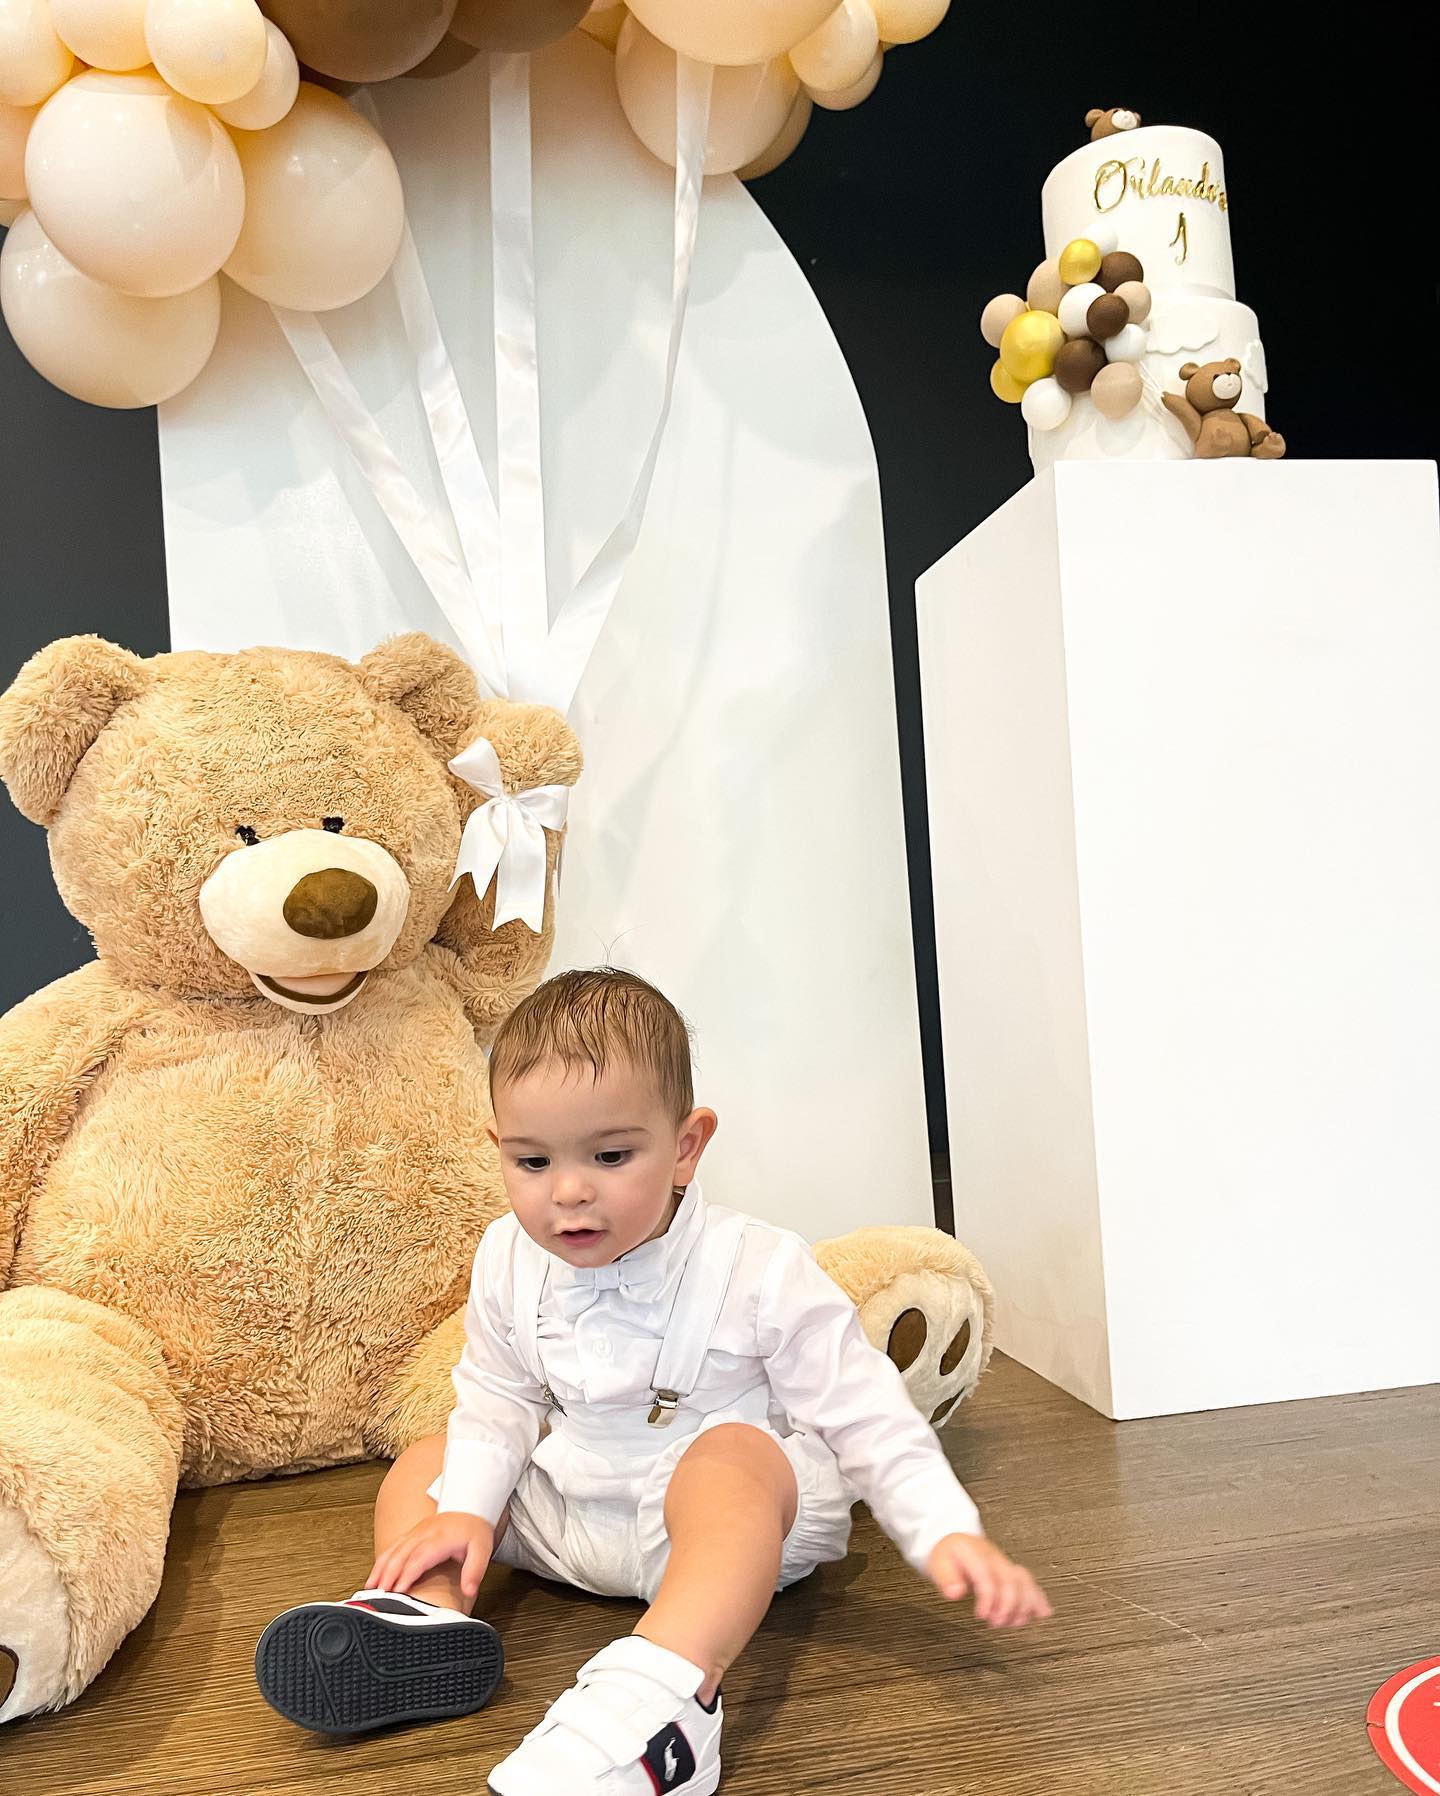 The Teddy Bear Theme Package- Including Balloon Garland